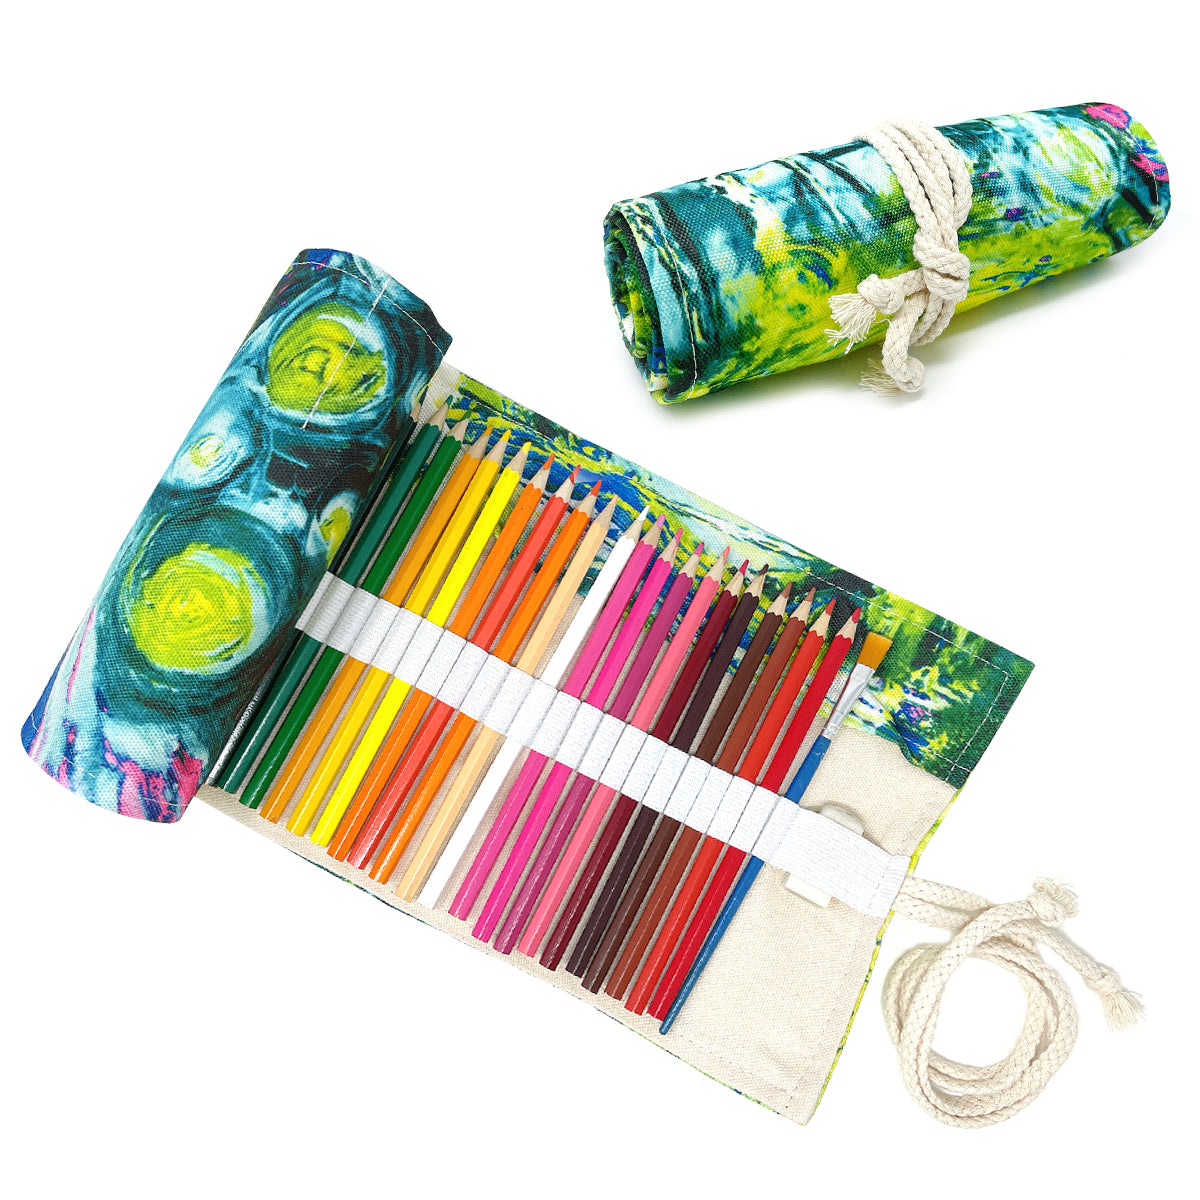 Wrapables Pencil Roll Organizer, Colored Pencil Wrap Pouch (72 Slots) Vibrant Leaves